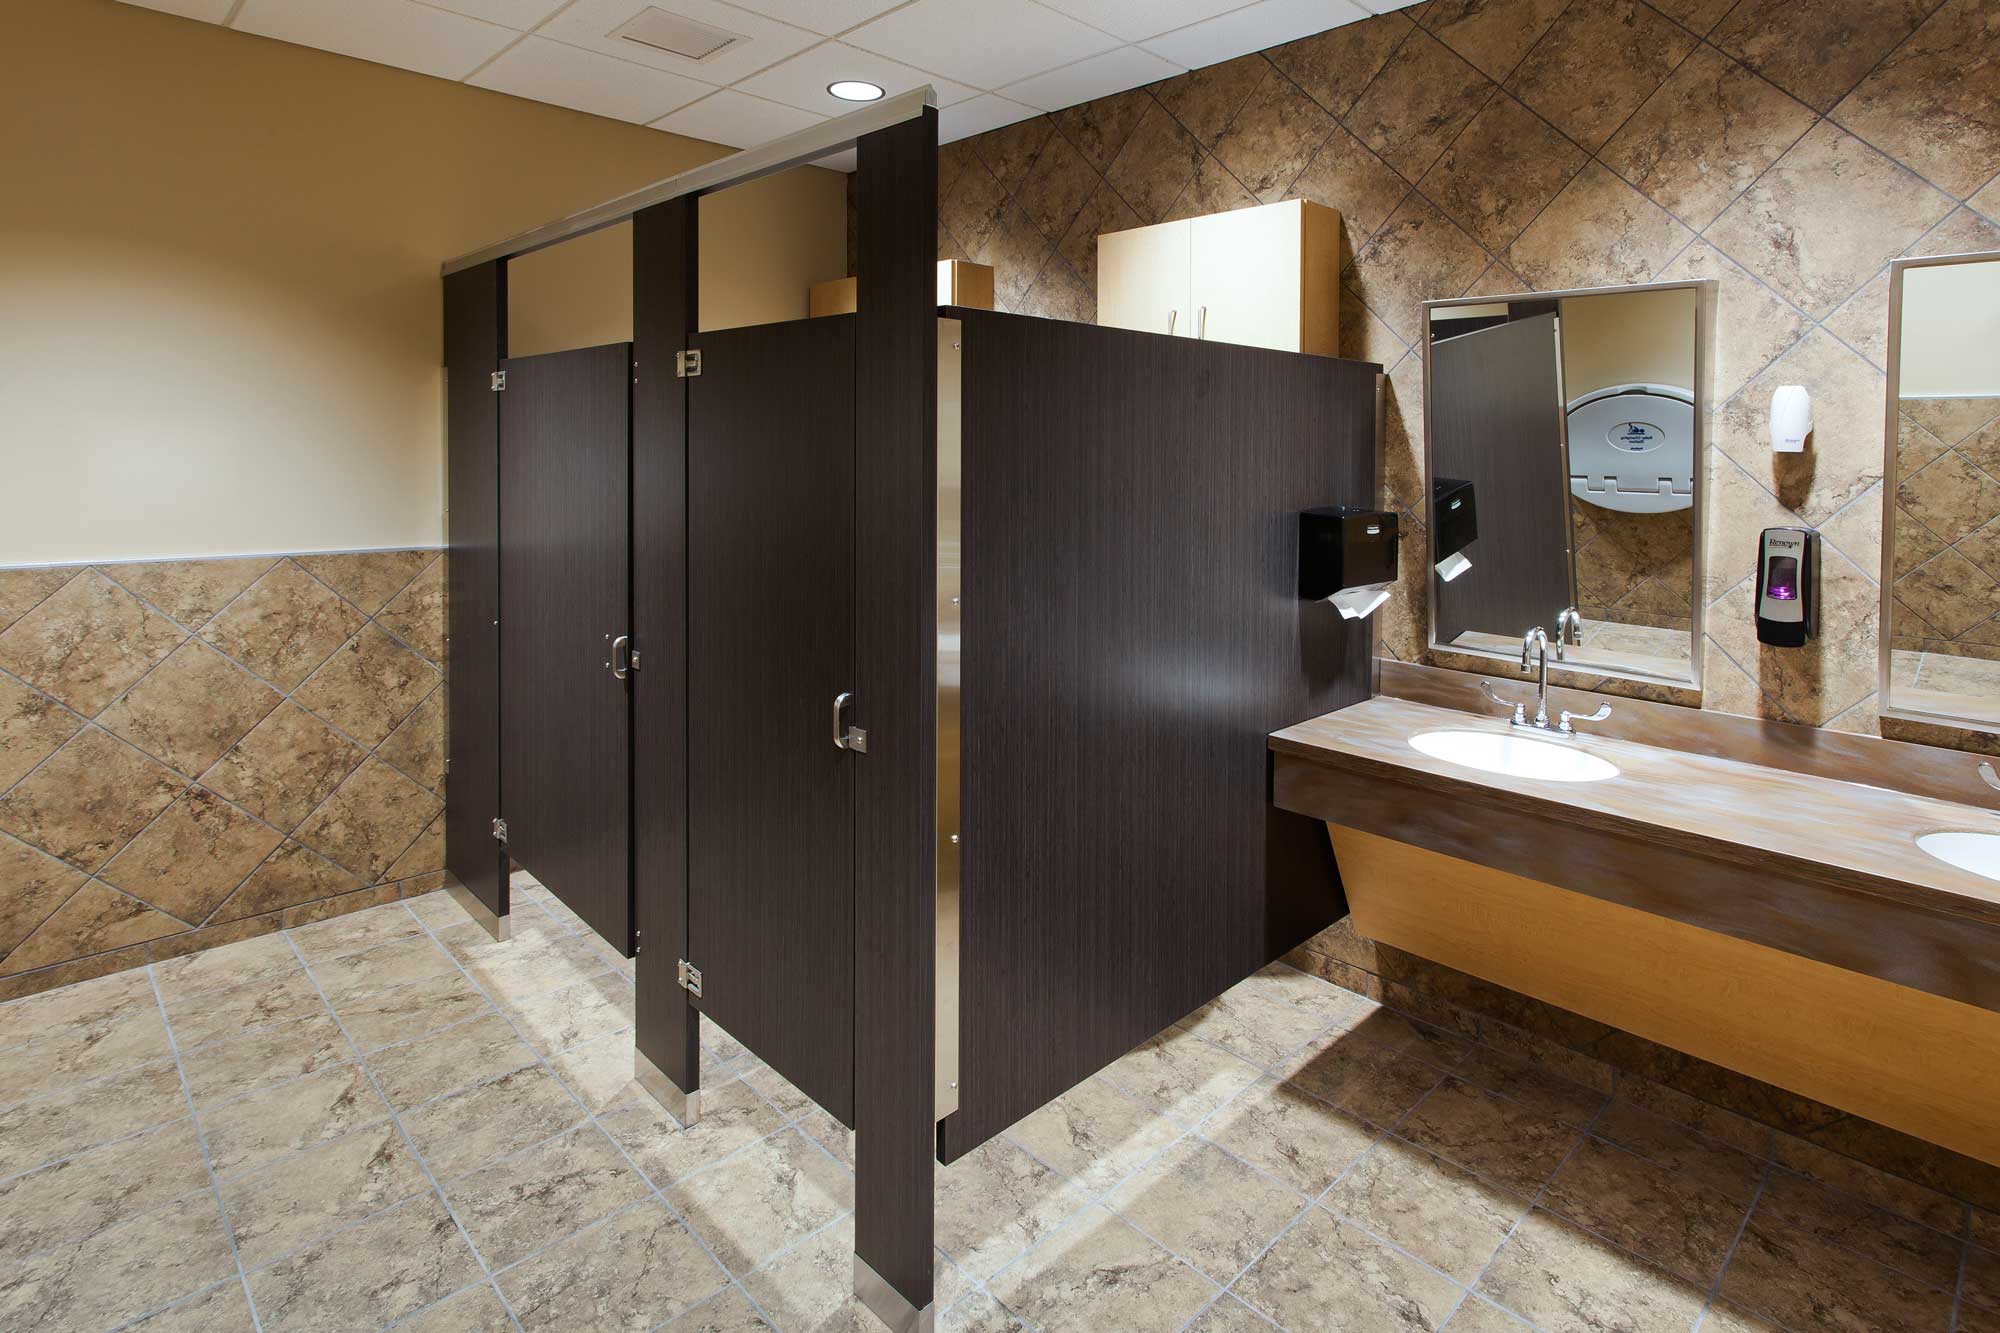 Unity Point OBGYN restrooms